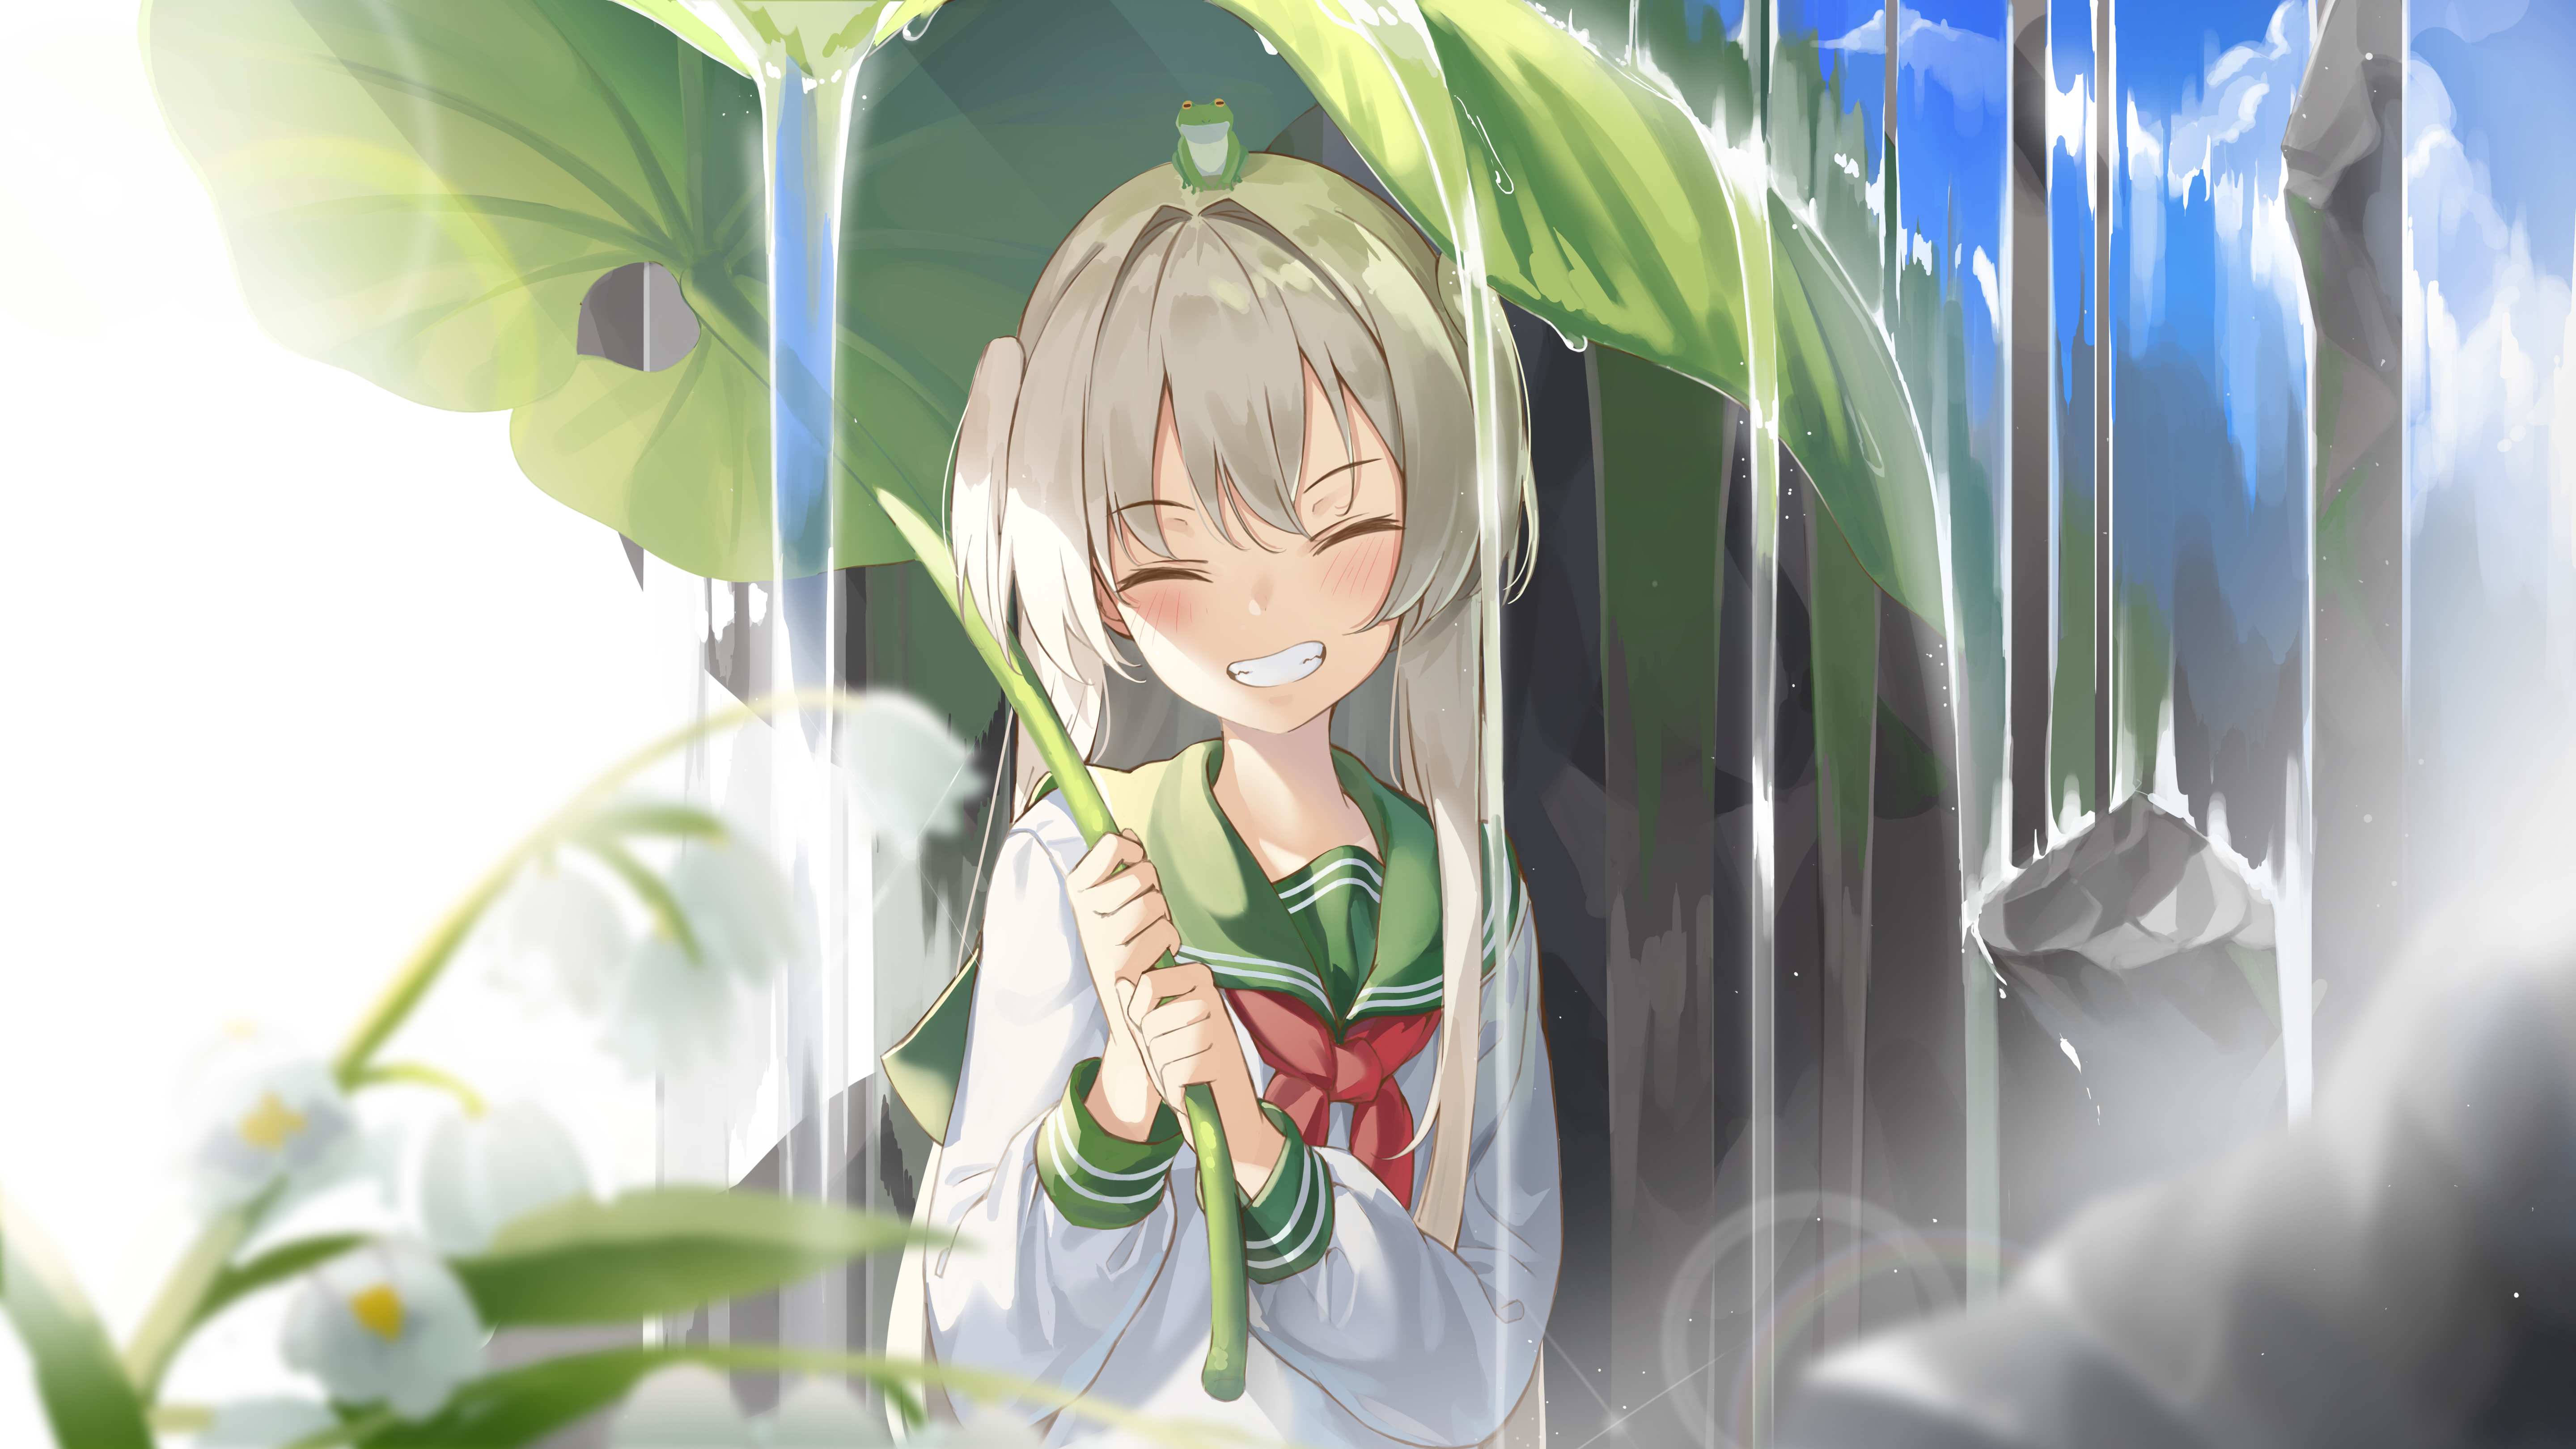 Anime Anime Girls Blonde Long Hair Smiling Closed Eyes Plants Flowers Frog Water Drops Waterfall Roc 5760x3240